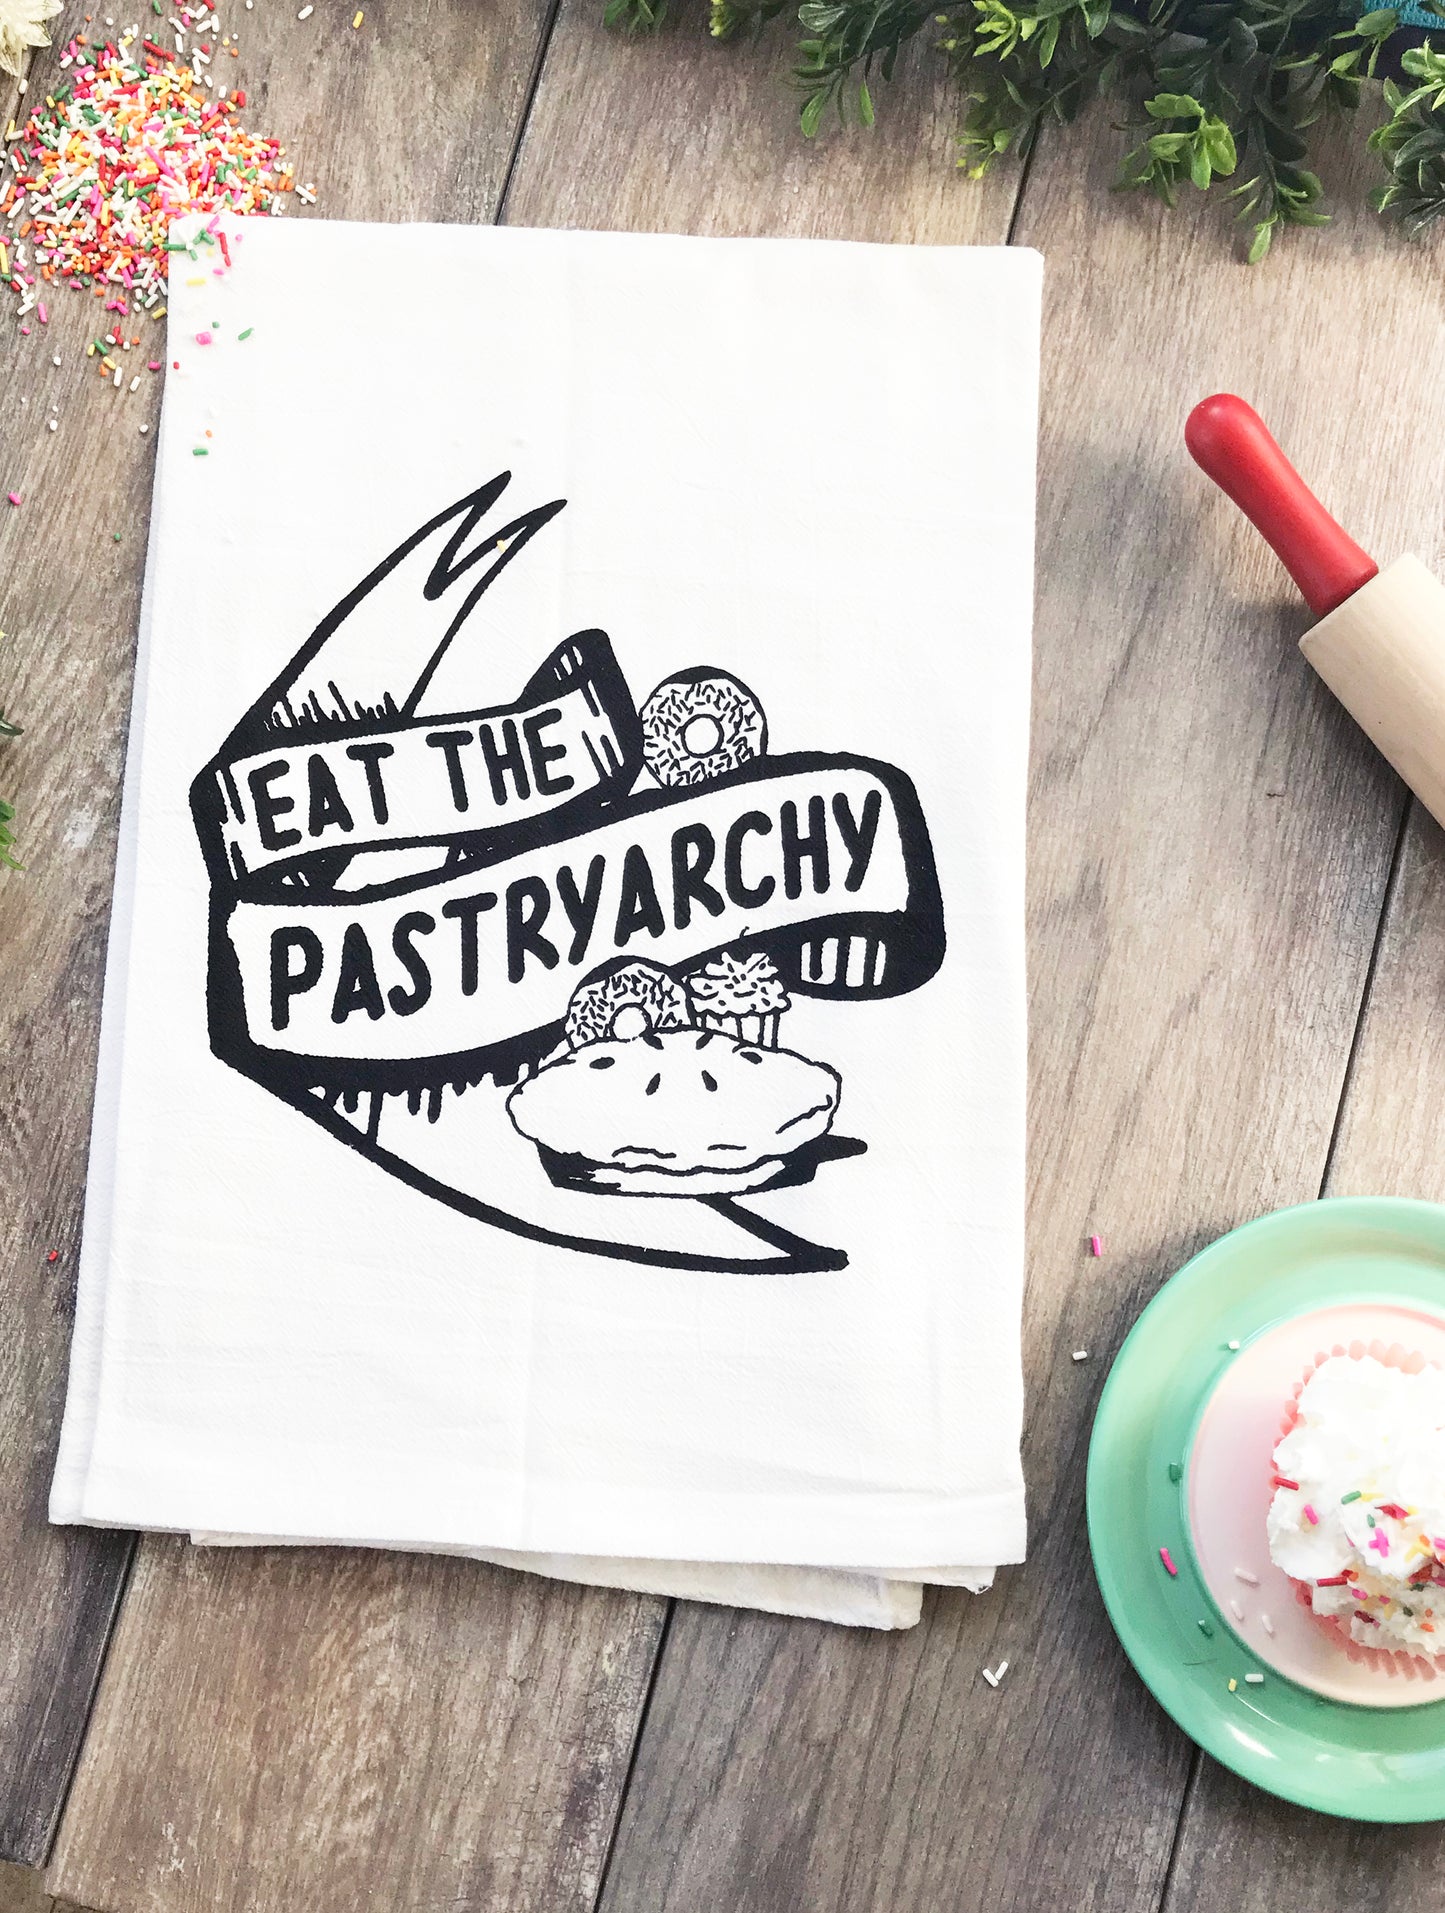 dish towel feminist funny saying Eat The Pastryarchy baking humor anti patriarchy decorative pastry donuts pies brownies muffins